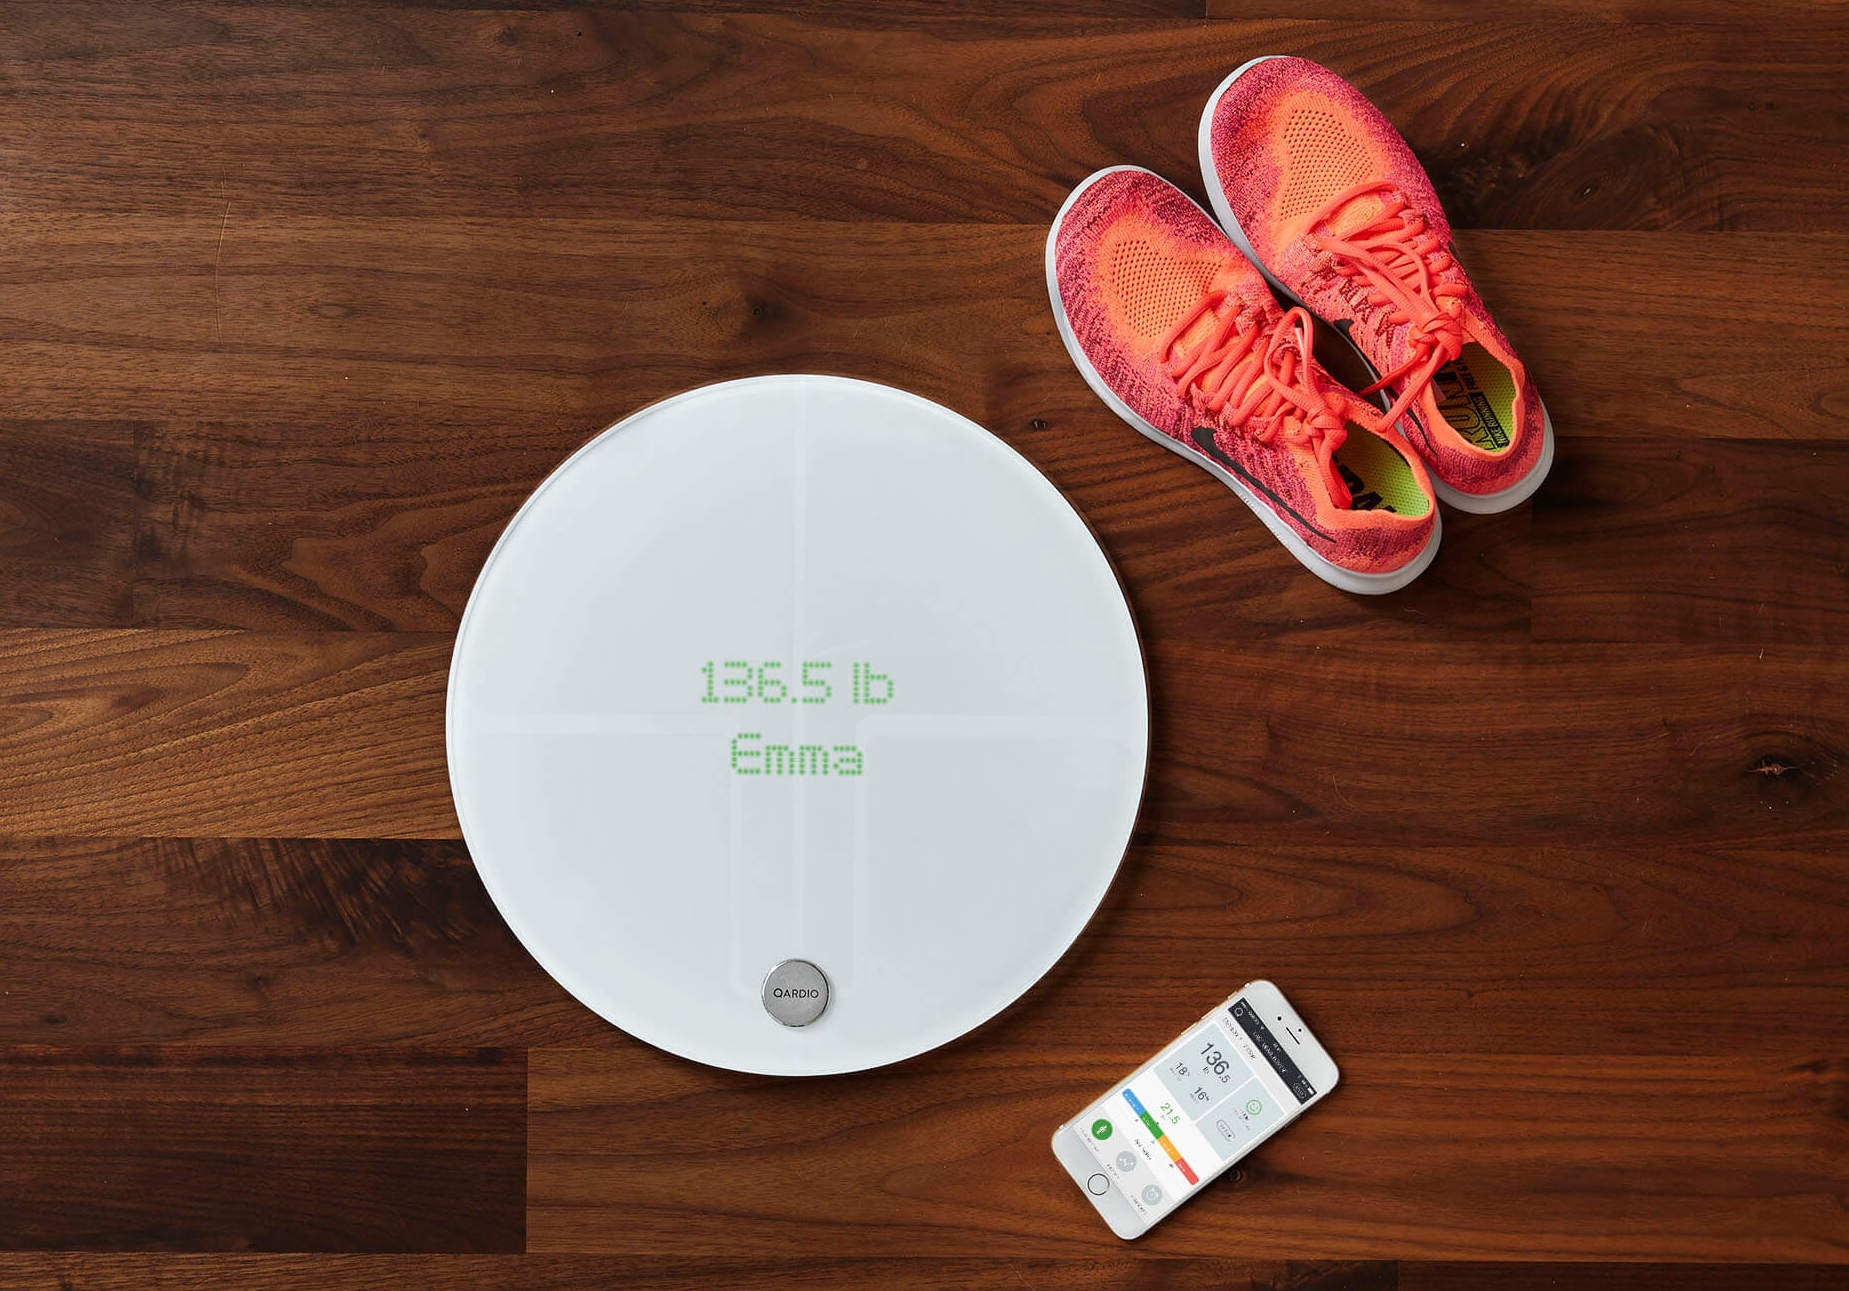 Qardio Launches New Smart Scale with Improvements in Design and Features